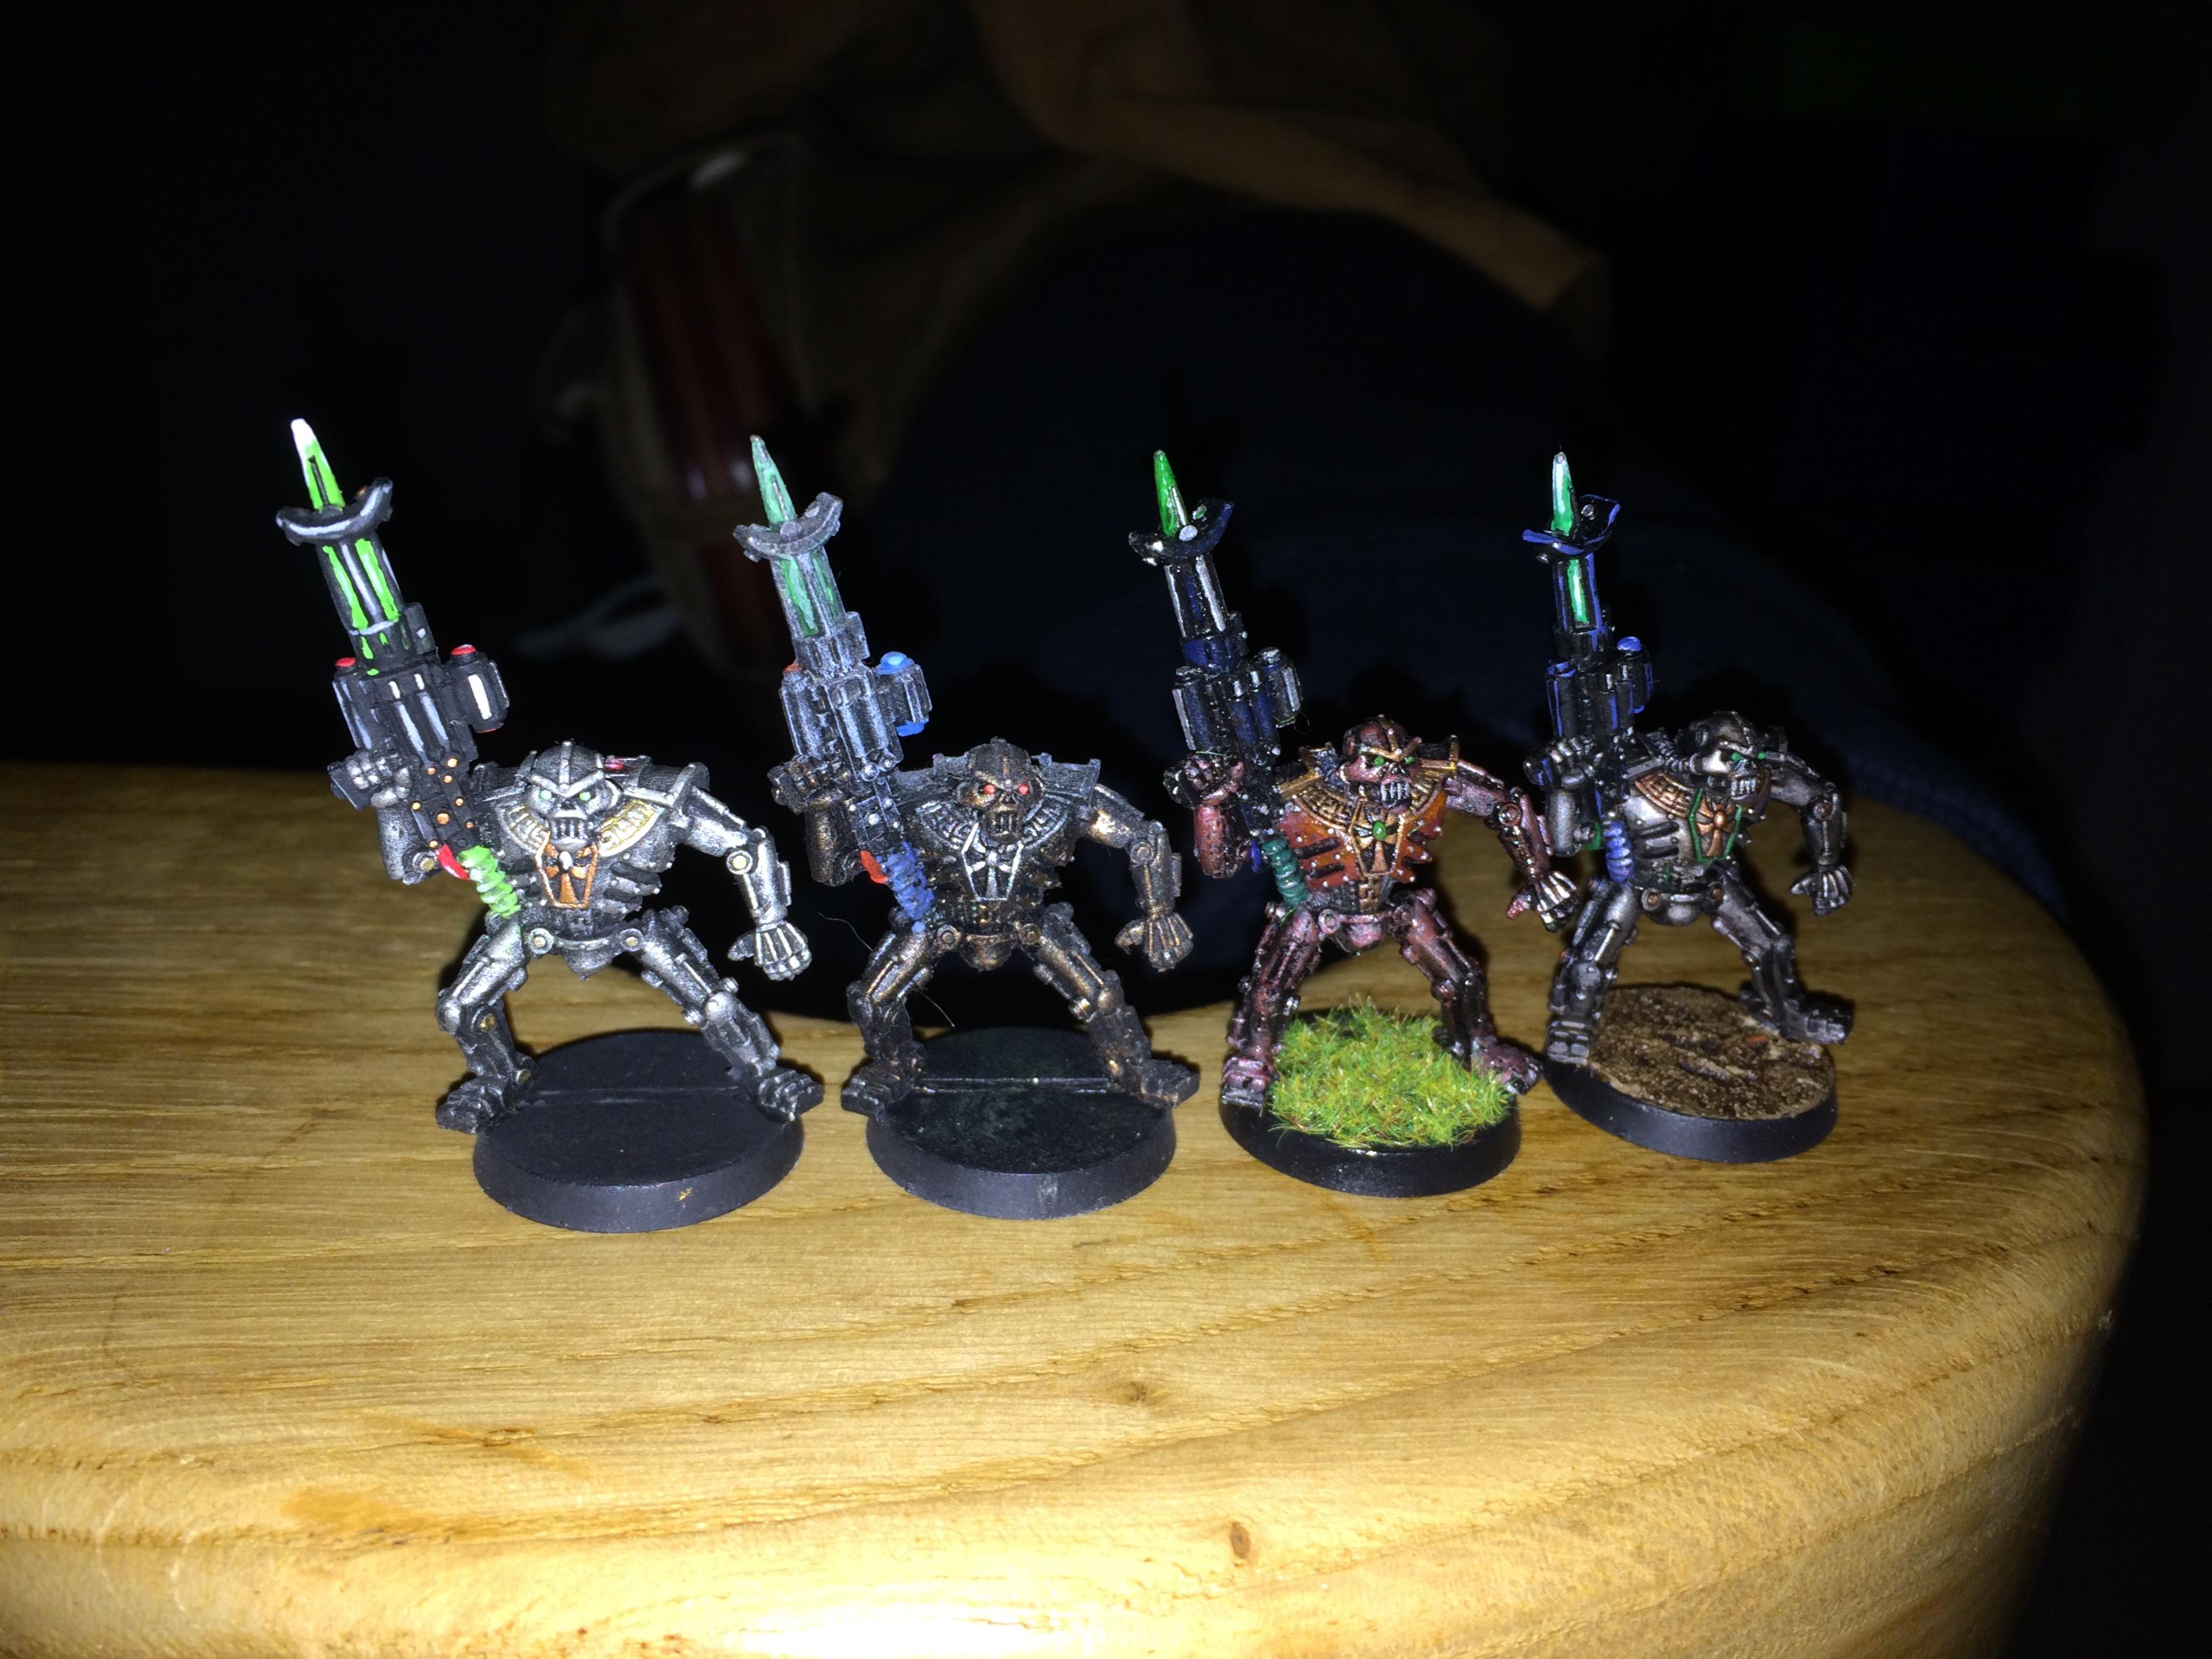 Conversion, Cool, Gaukler, Lord, Metallic, Necrons, Old, Scratch Build, Skeletons, Style, Undead, Warriors